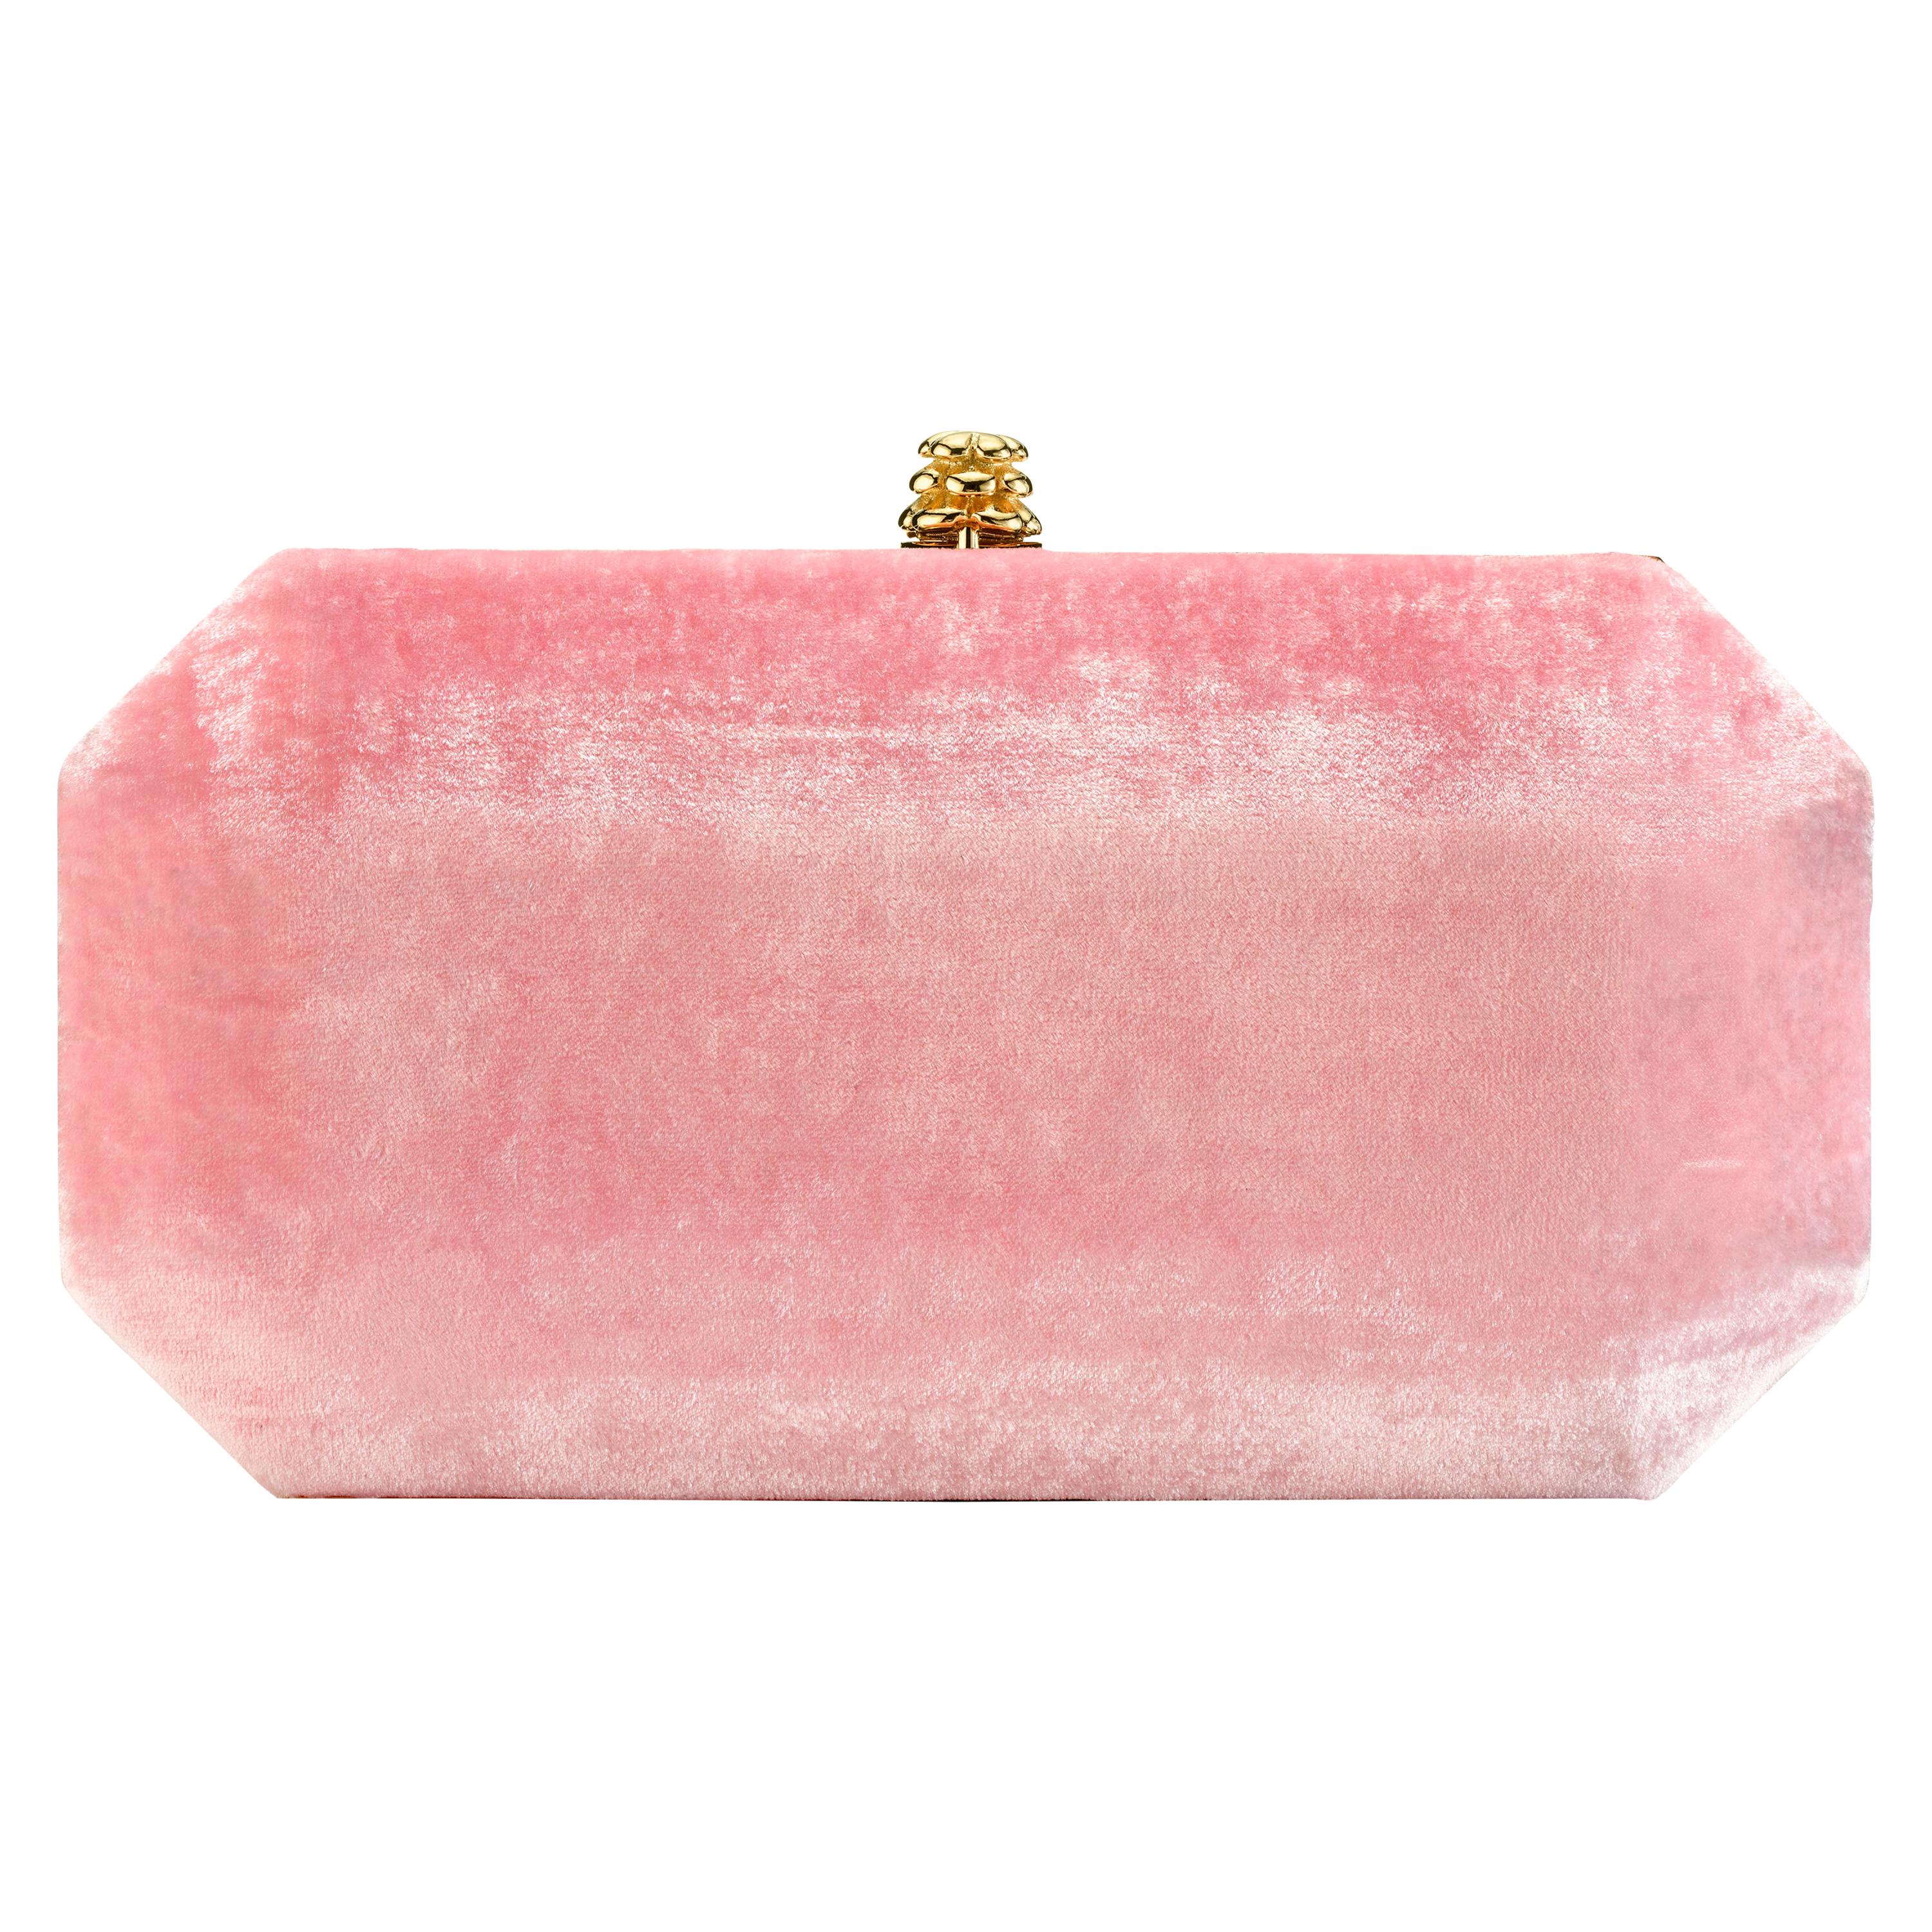 TYLER ELLIS Perry Small Clutch Pink Crushed Velvet Gold Hardware